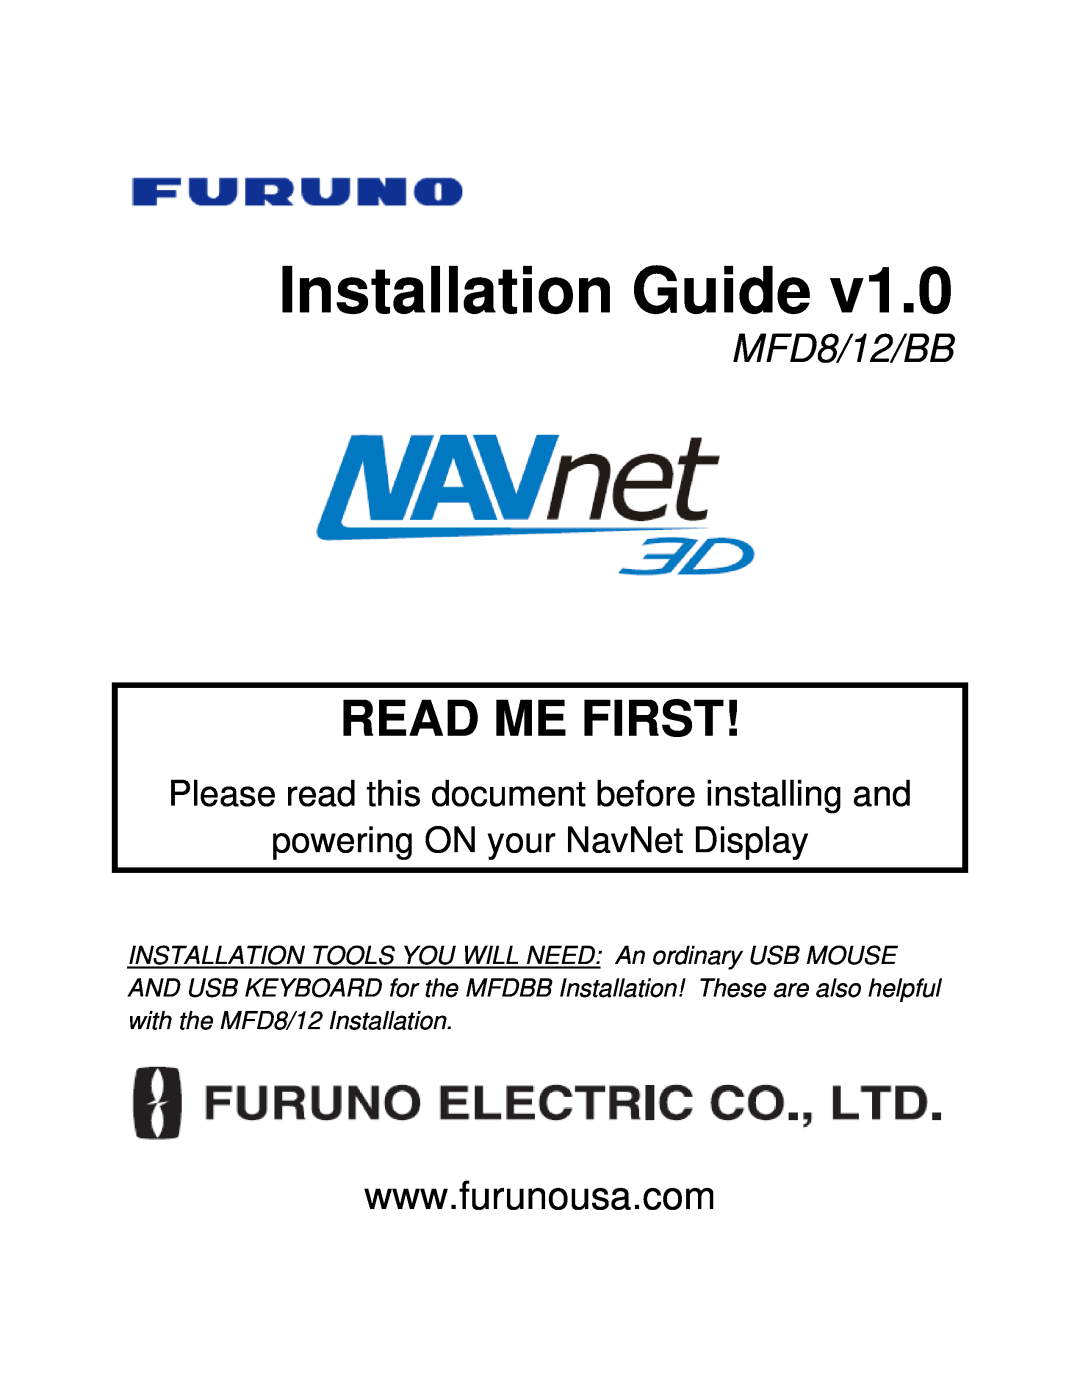 Furuno MFD8/12/BB manual Please read this document before installing and, powering ON your NavNet Display, Read Me First 